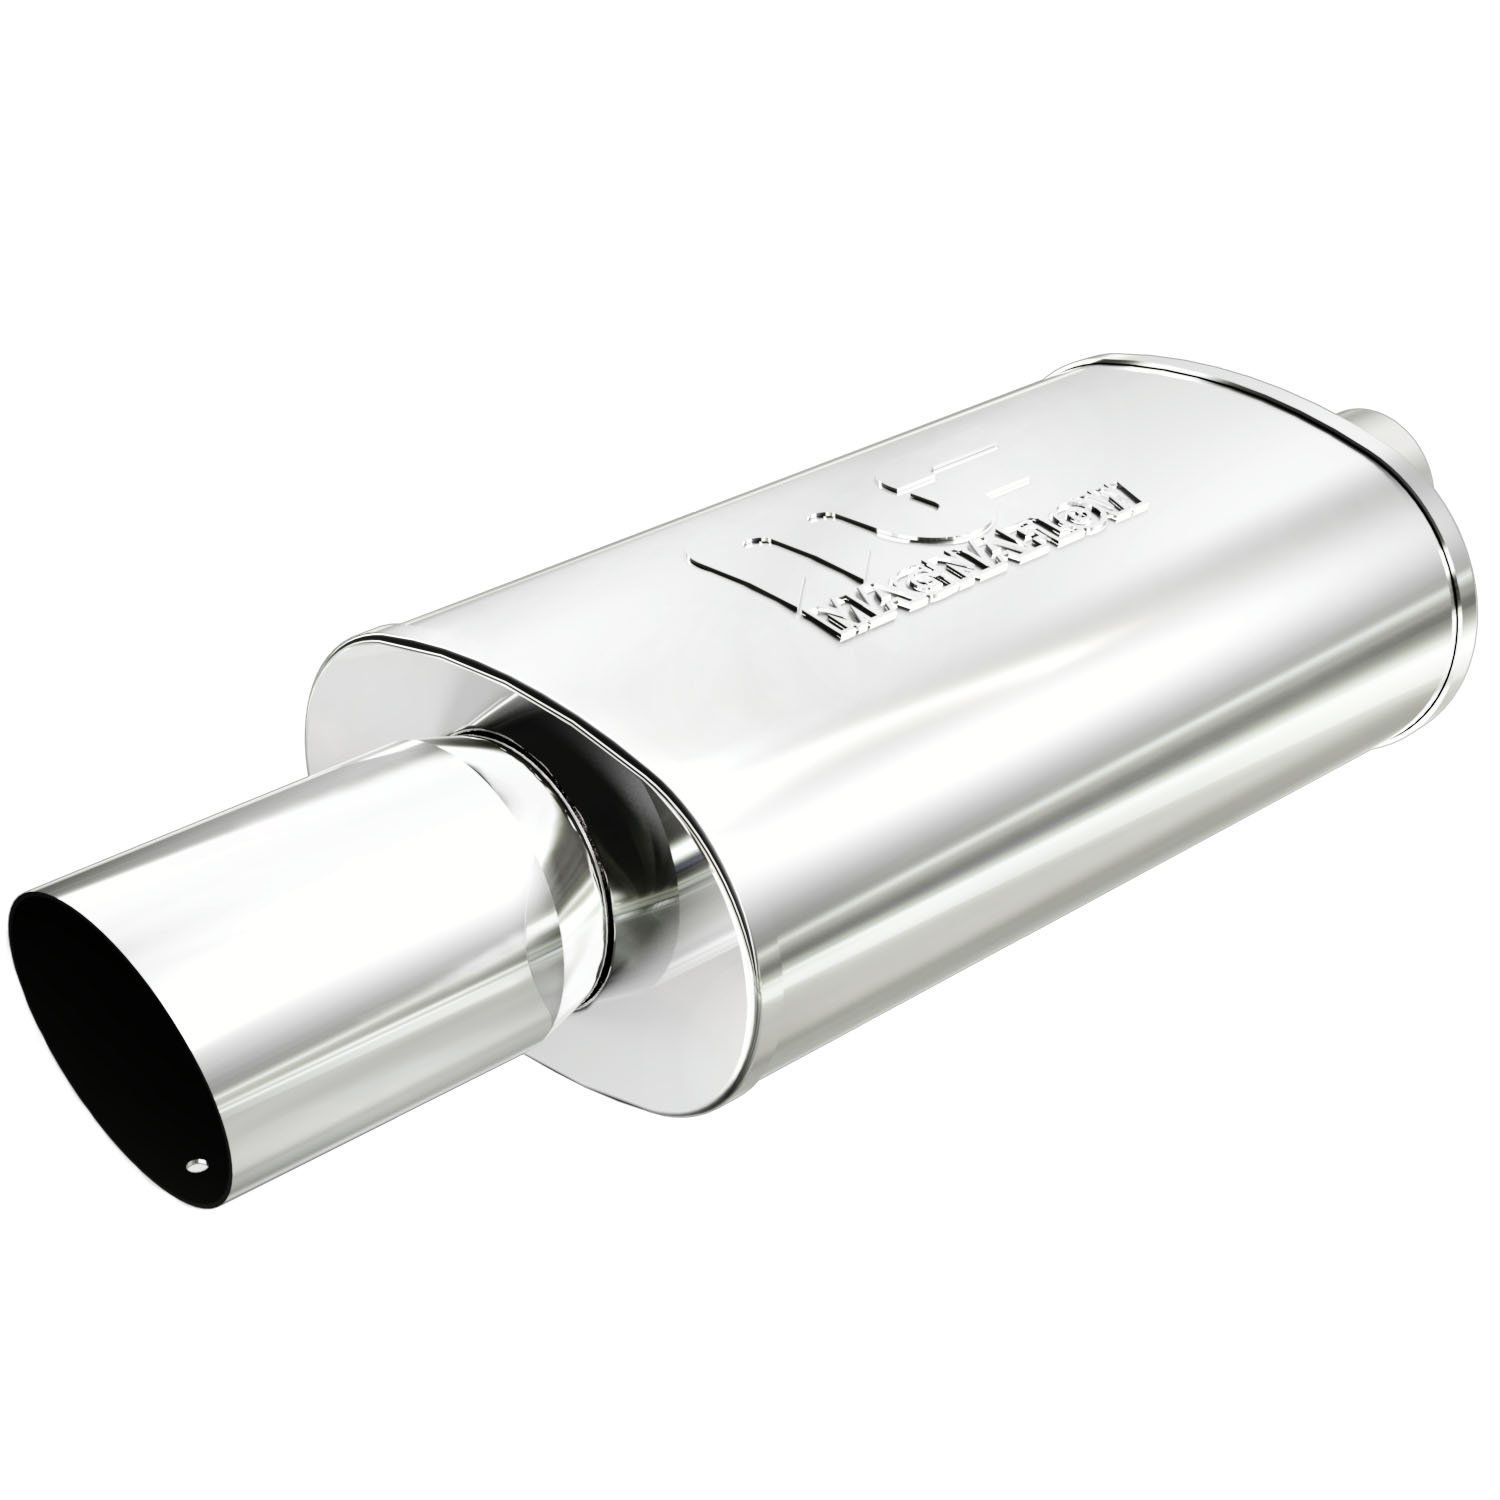 Street Series Universal Muffler With Single Tip Inlet/Outlet: